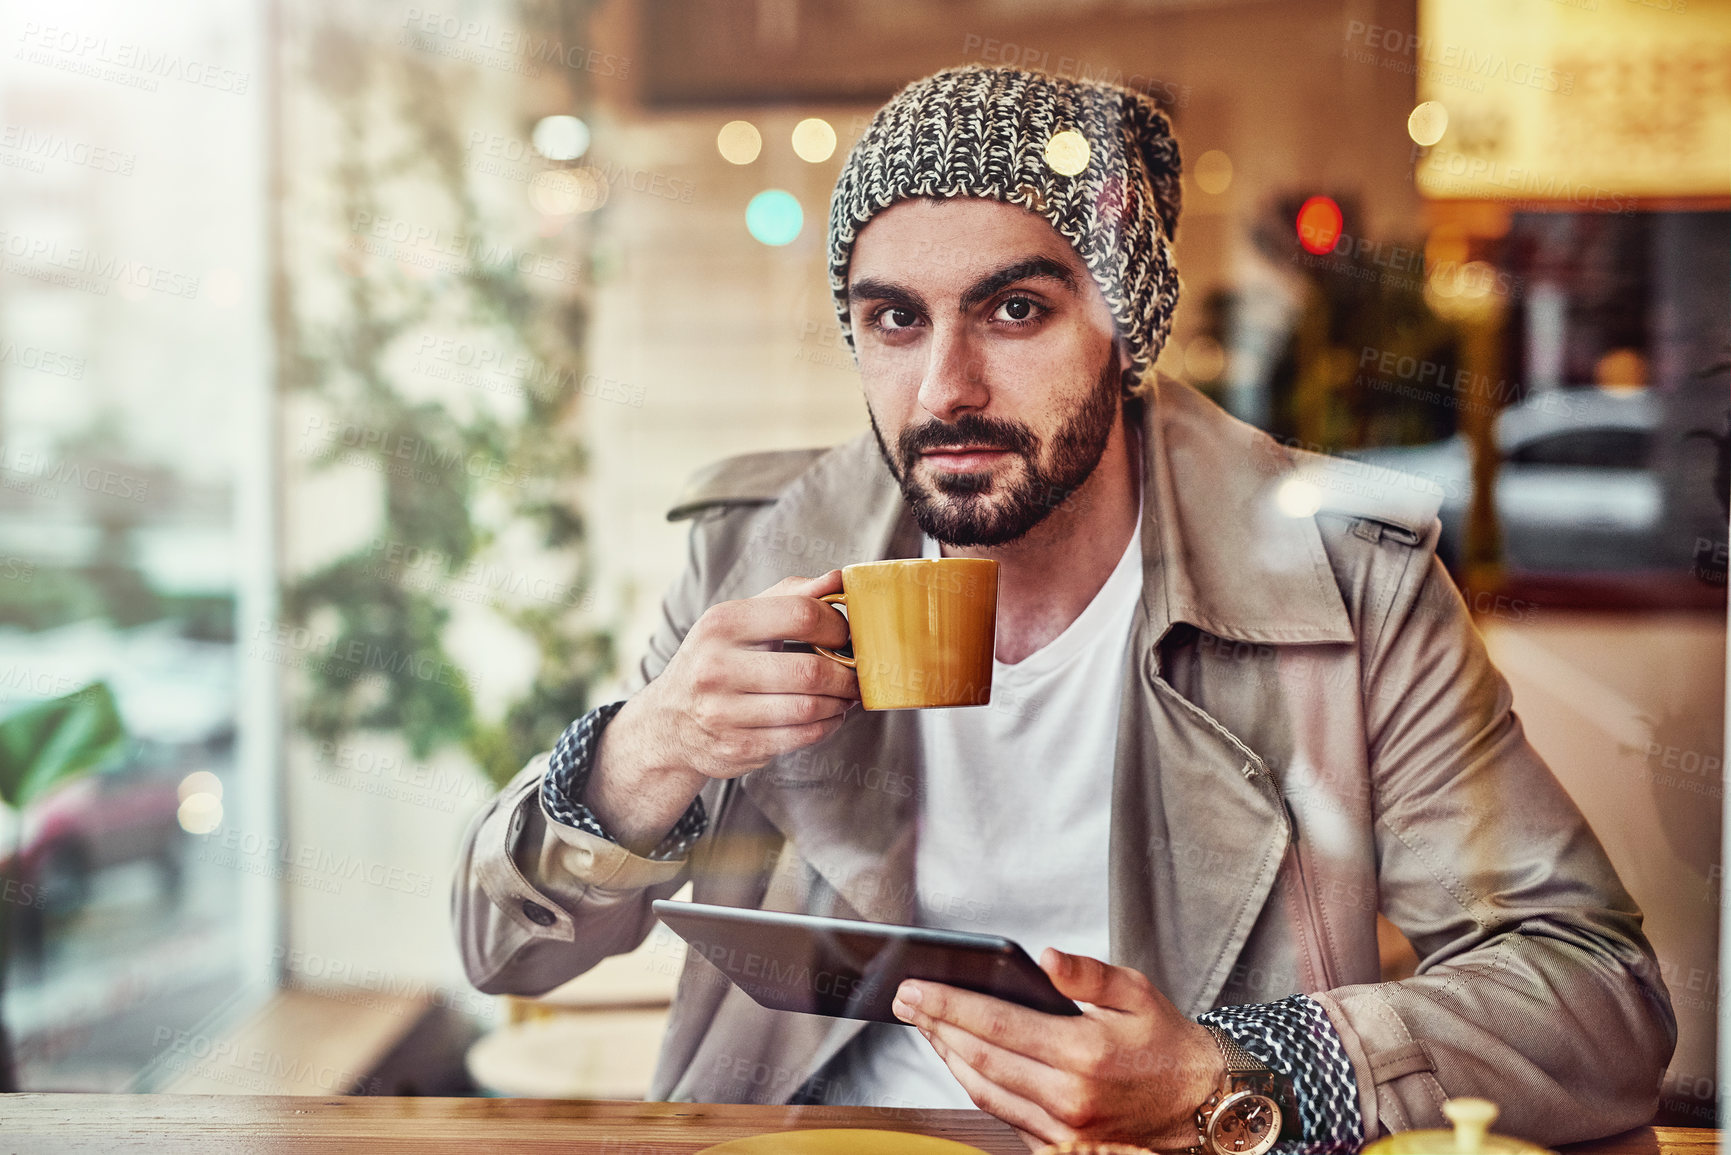 Buy stock photo Portrait of handsome young man drinking a coffee and using a digital tablet while sitting at a counter in a cafe